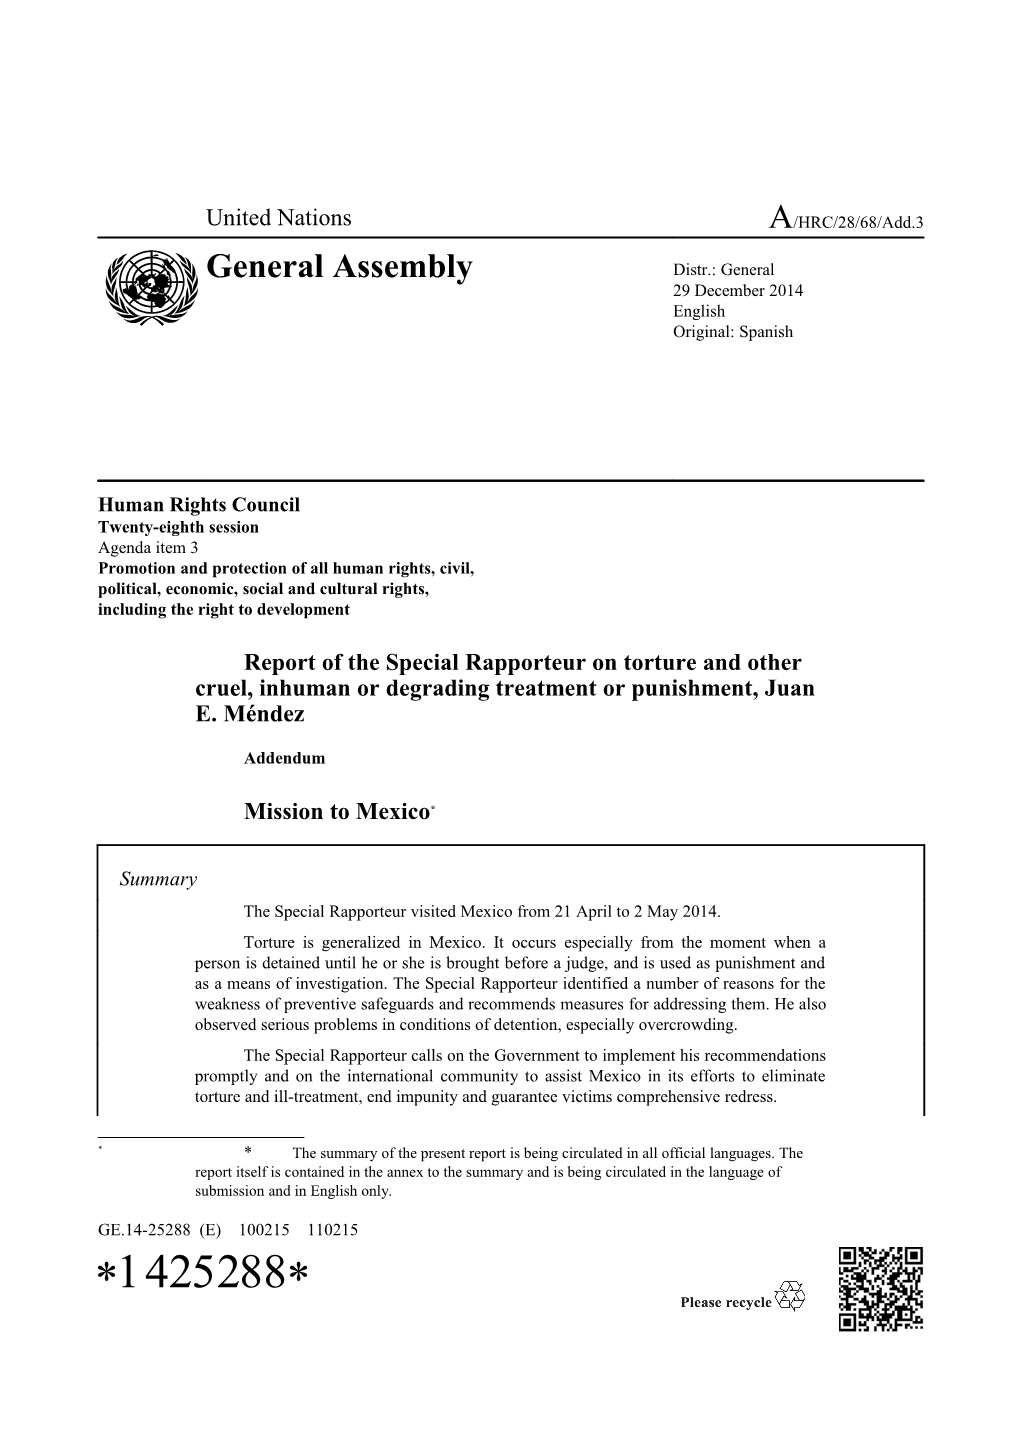 Report of the Special Rapporteur on Torture and Other Cruel, Inhuman Or Degrading Treatment